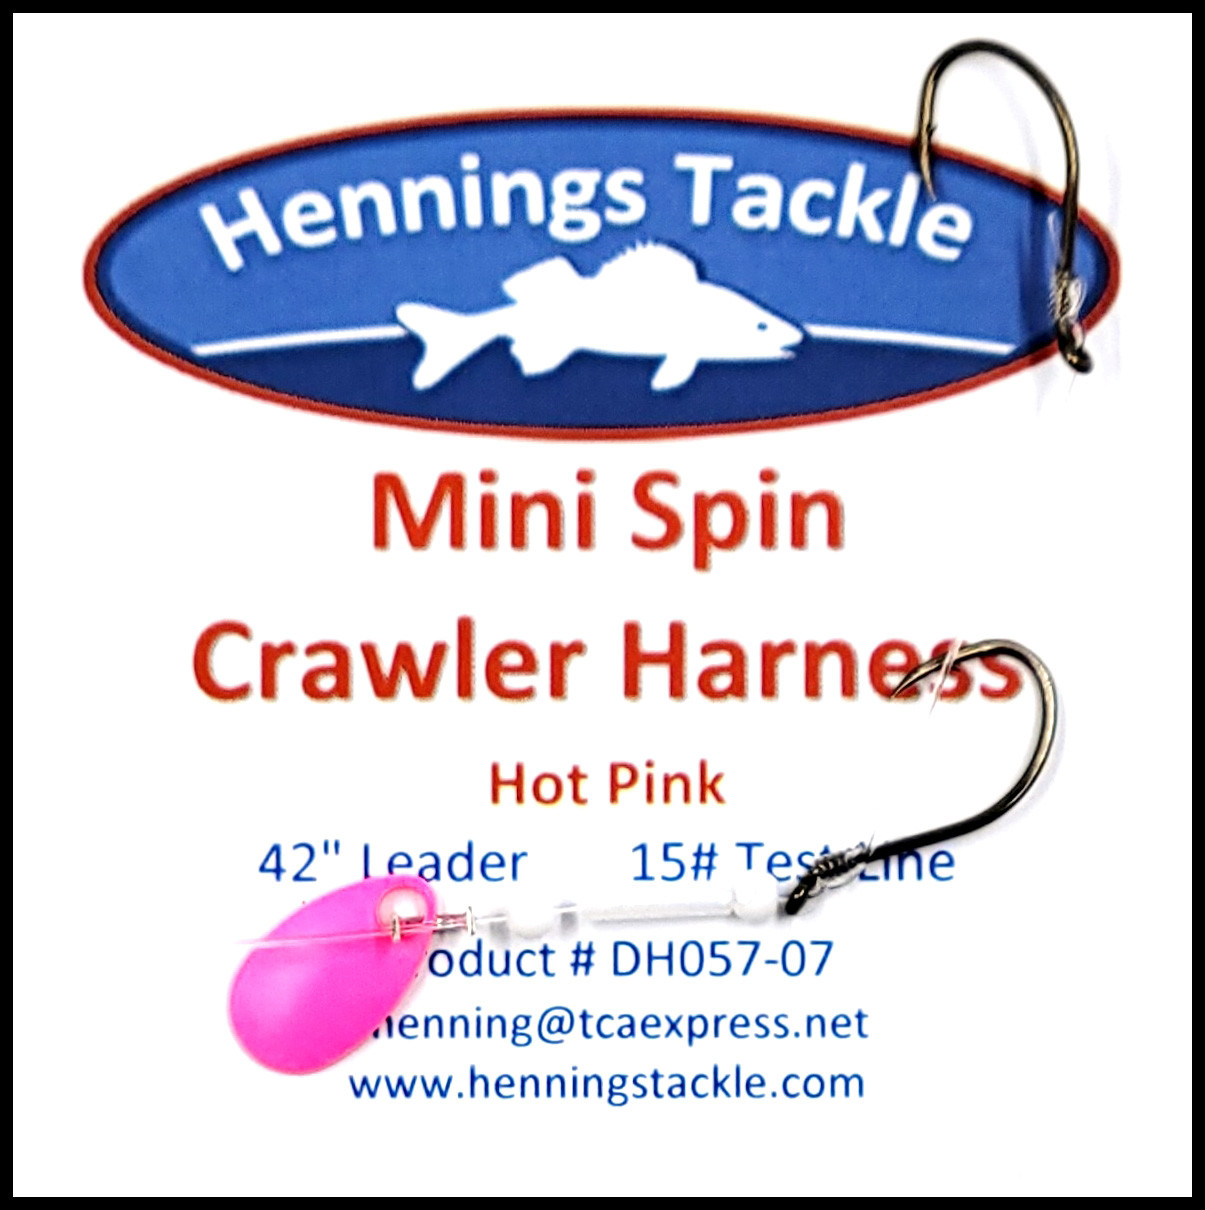 Mini Spin Crawler Harness - Hot Pink - Henning's Tackle